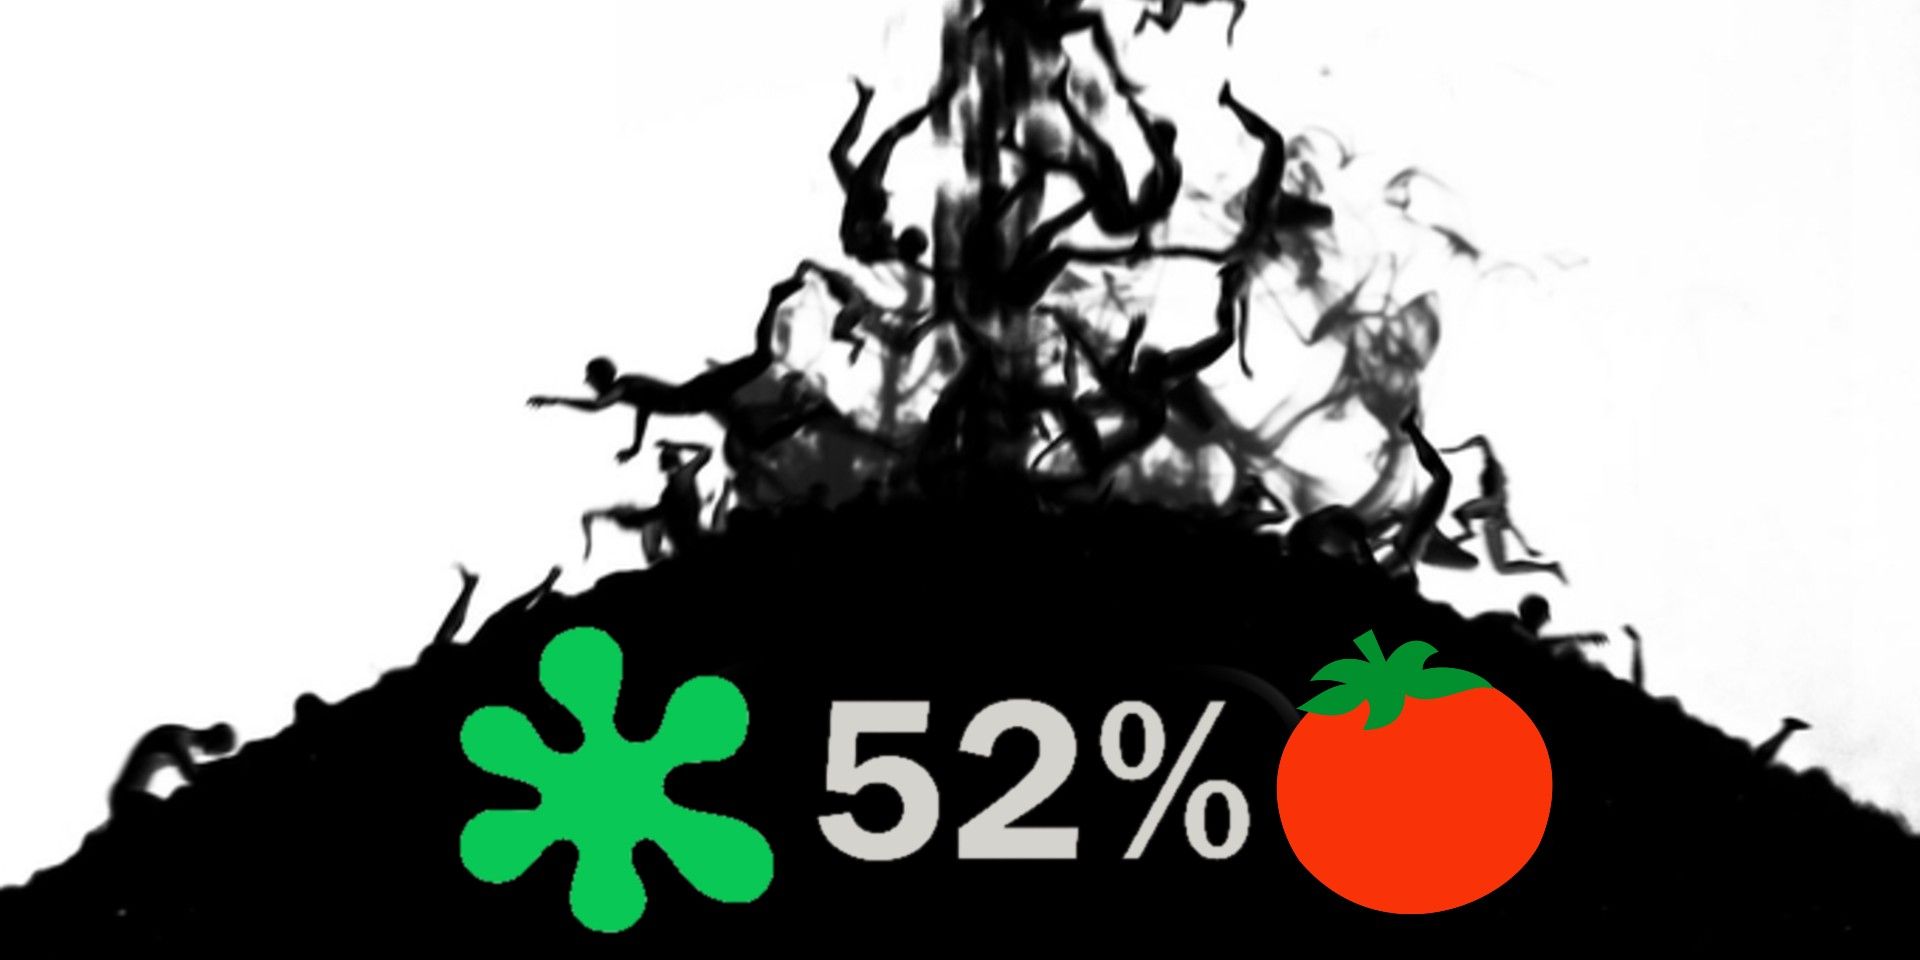 Old - Rotten Tomatoes